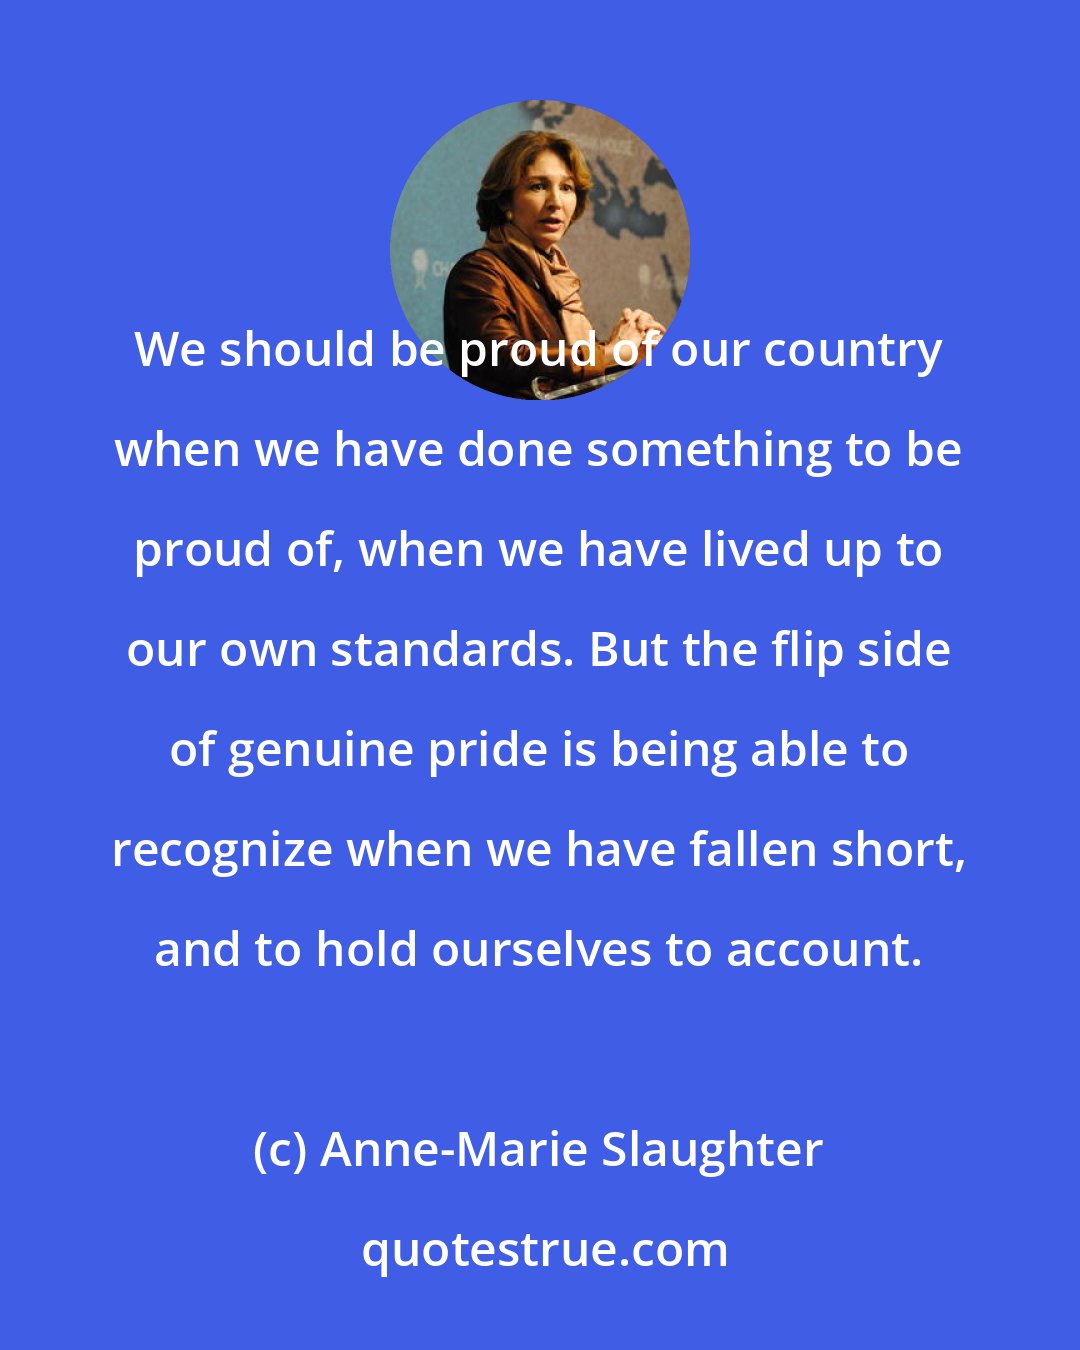 Anne-Marie Slaughter: We should be proud of our country when we have done something to be proud of, when we have lived up to our own standards. But the flip side of genuine pride is being able to recognize when we have fallen short, and to hold ourselves to account.